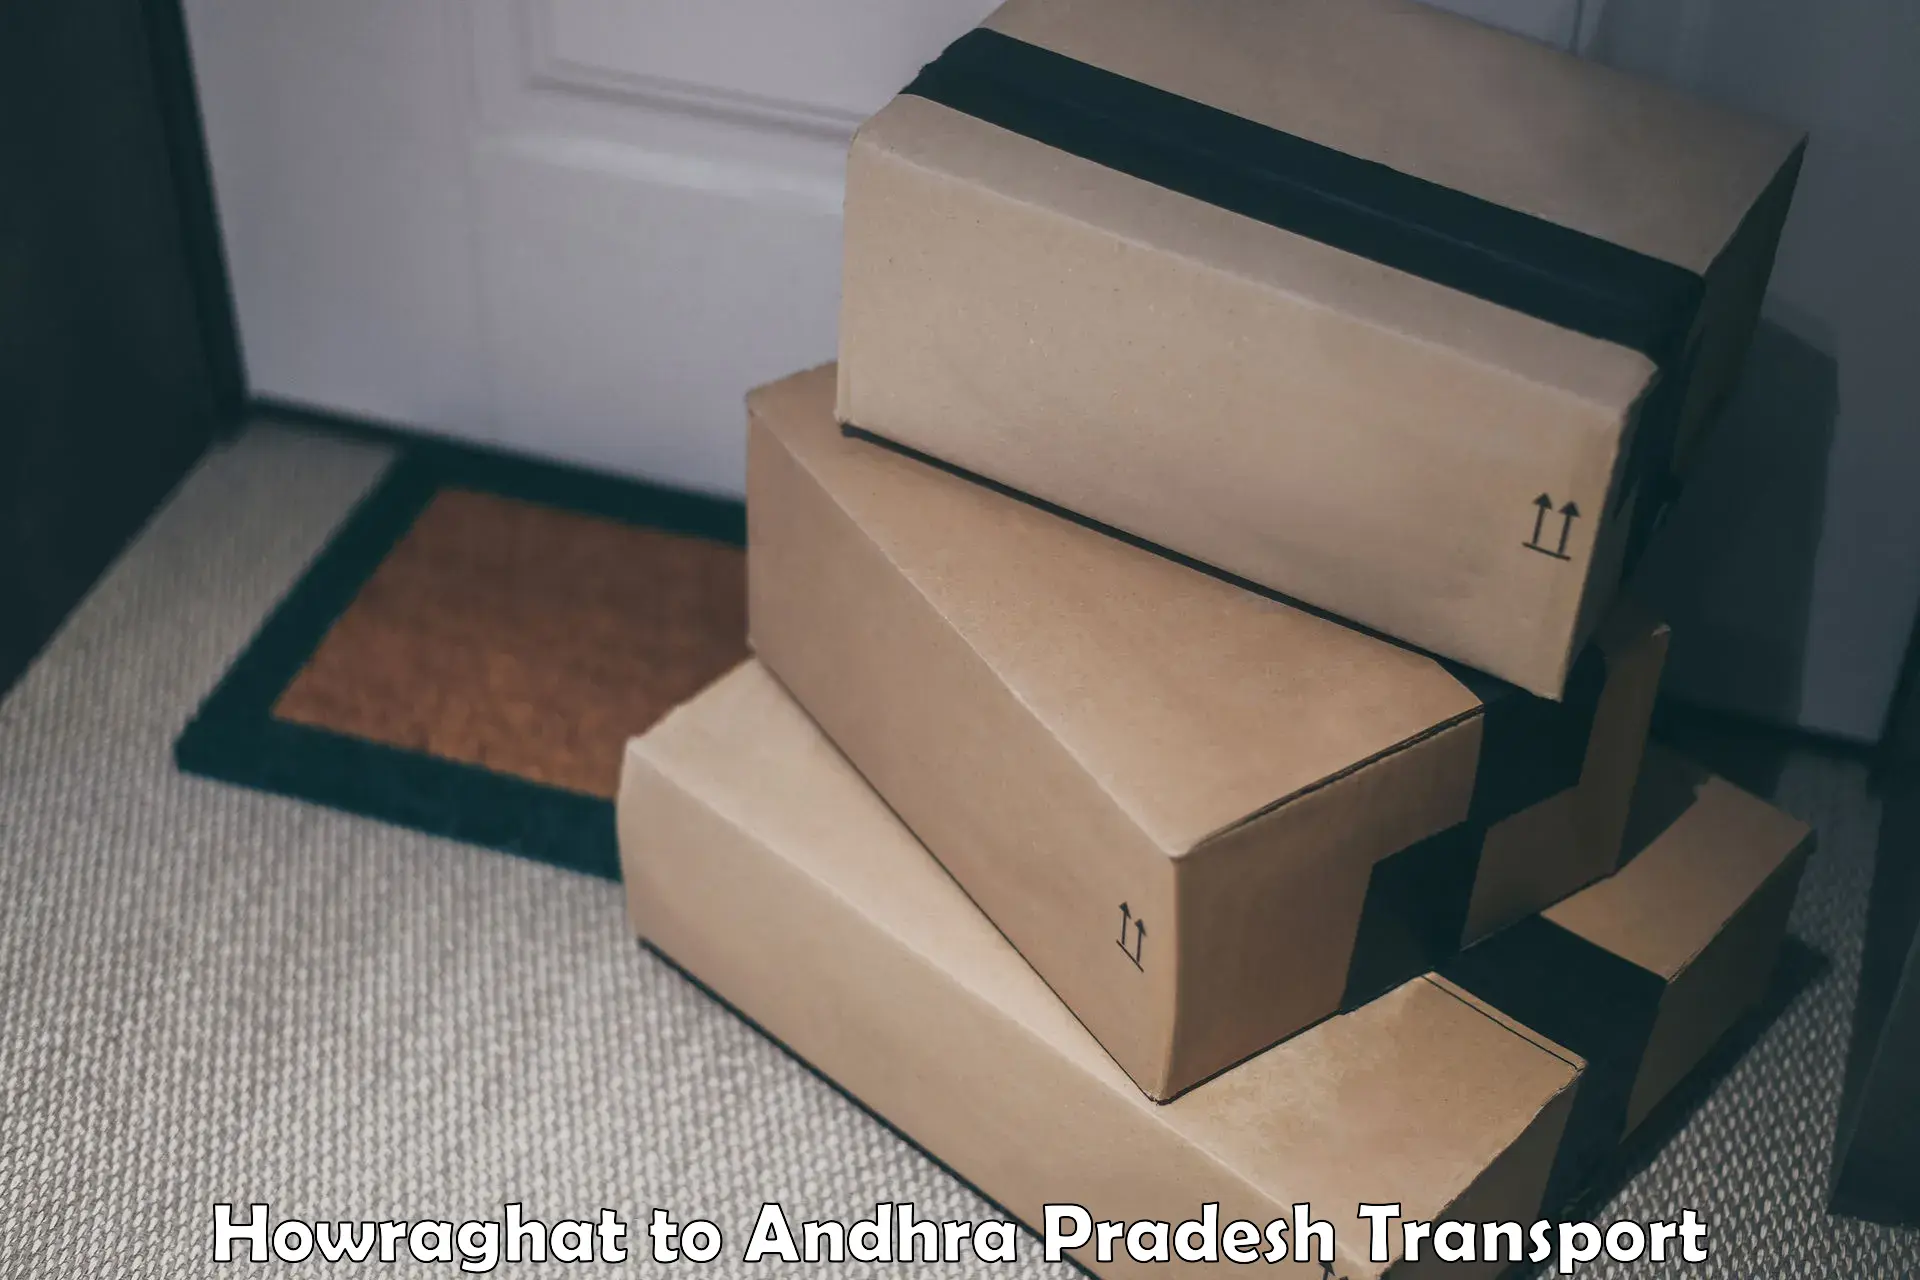 Air freight transport services Howraghat to Puttur Tirupati